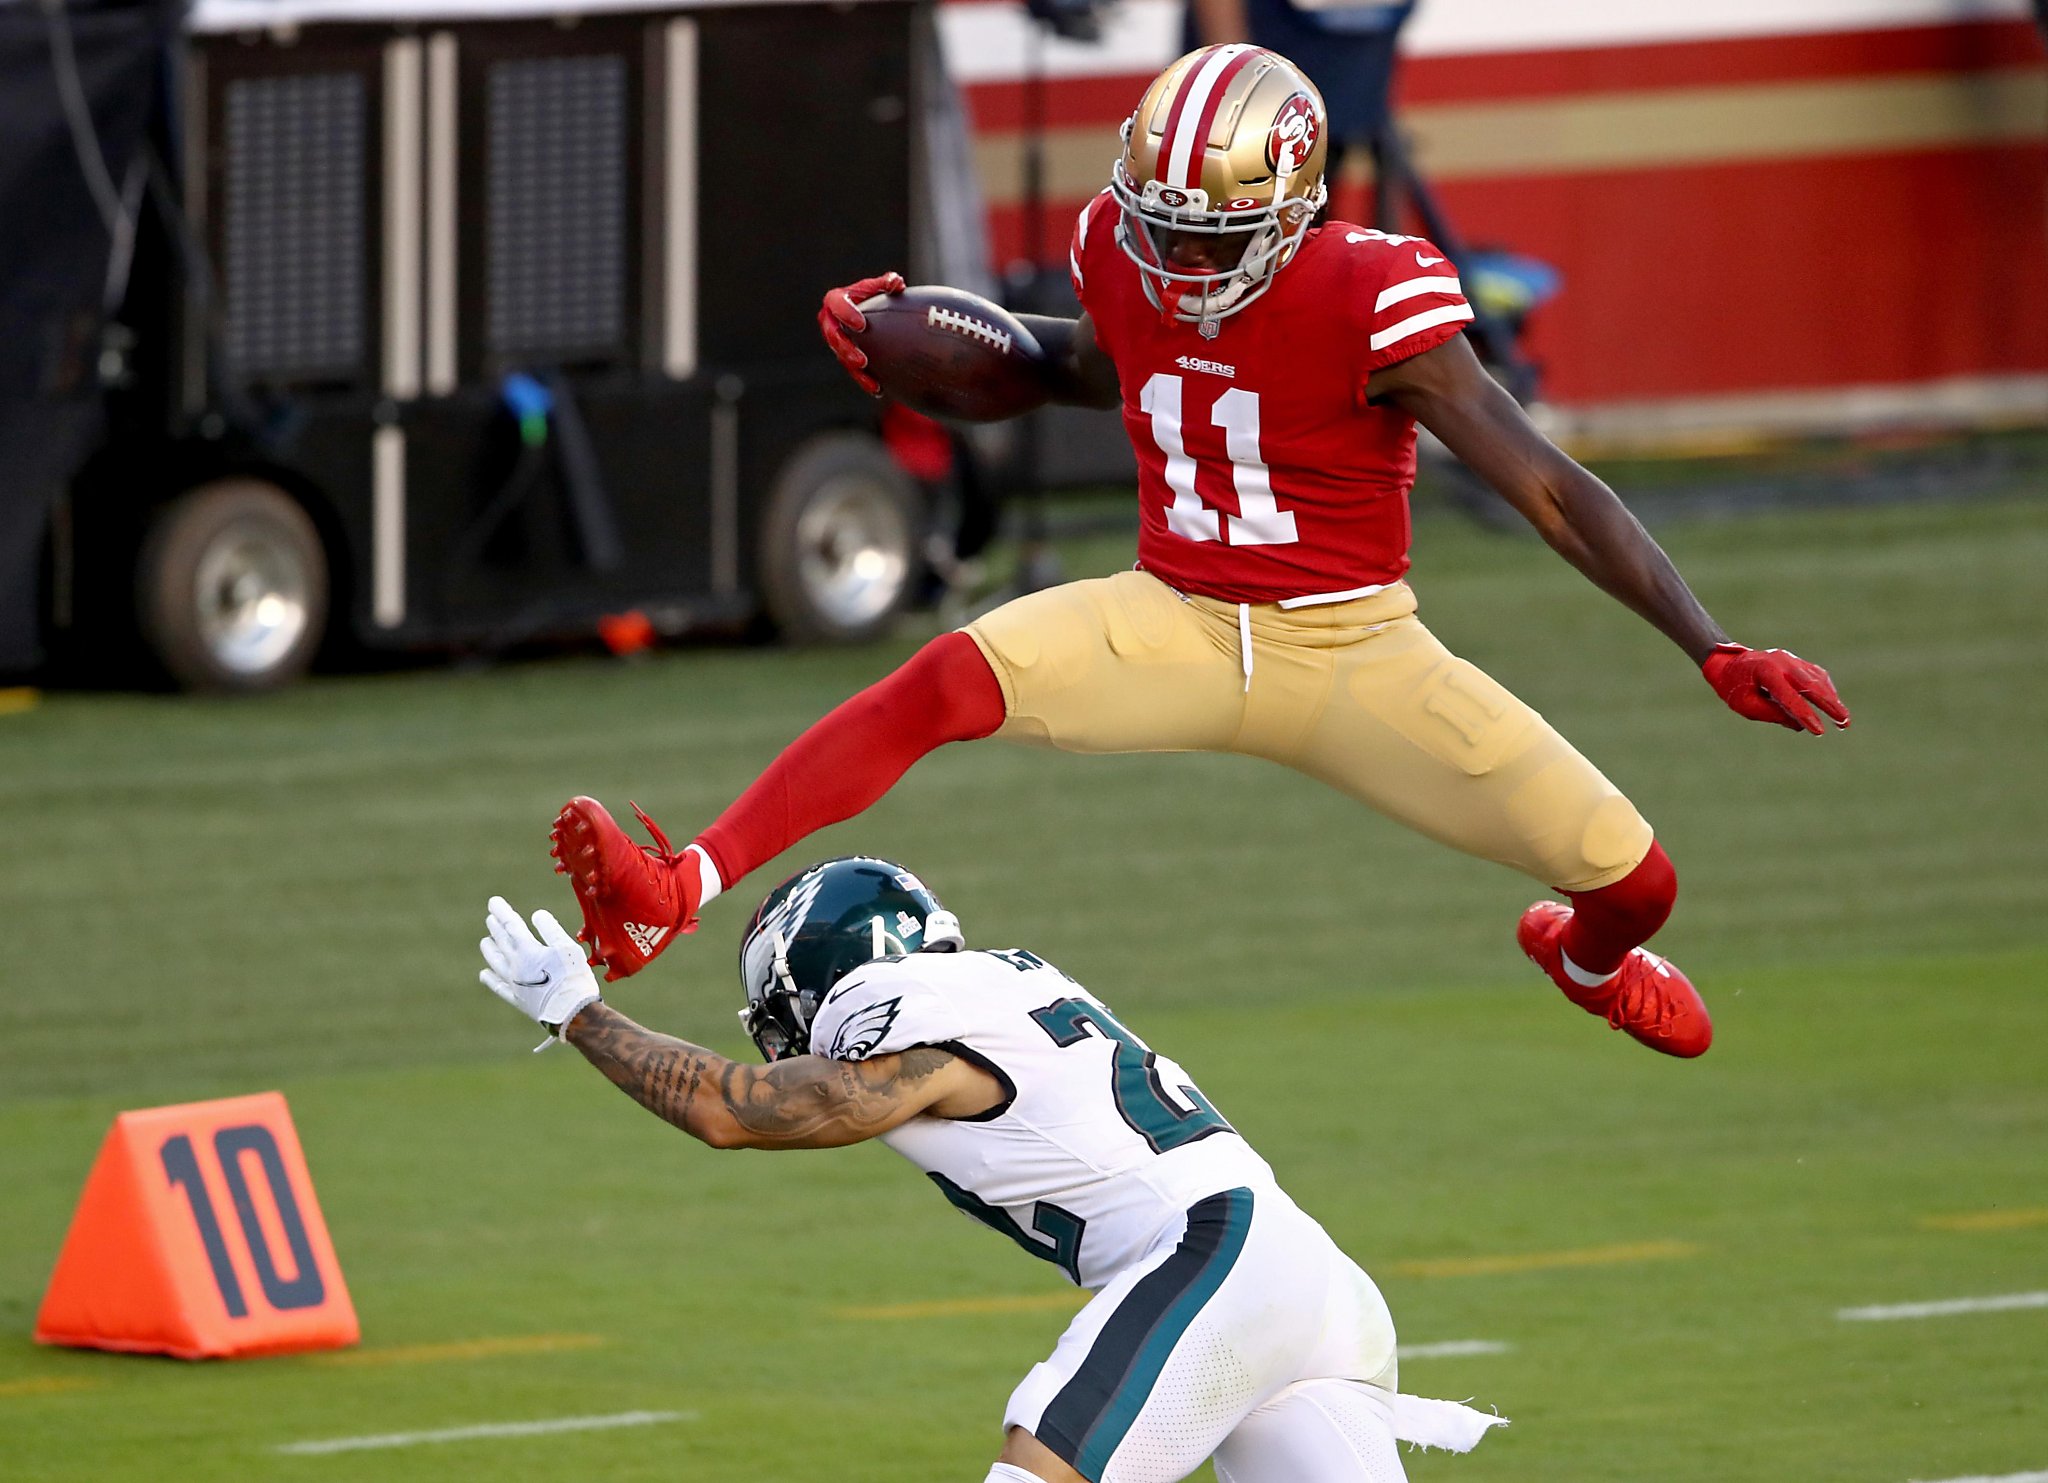 49ers wide receiver Brandon Aiyuk finding the end zone more fun